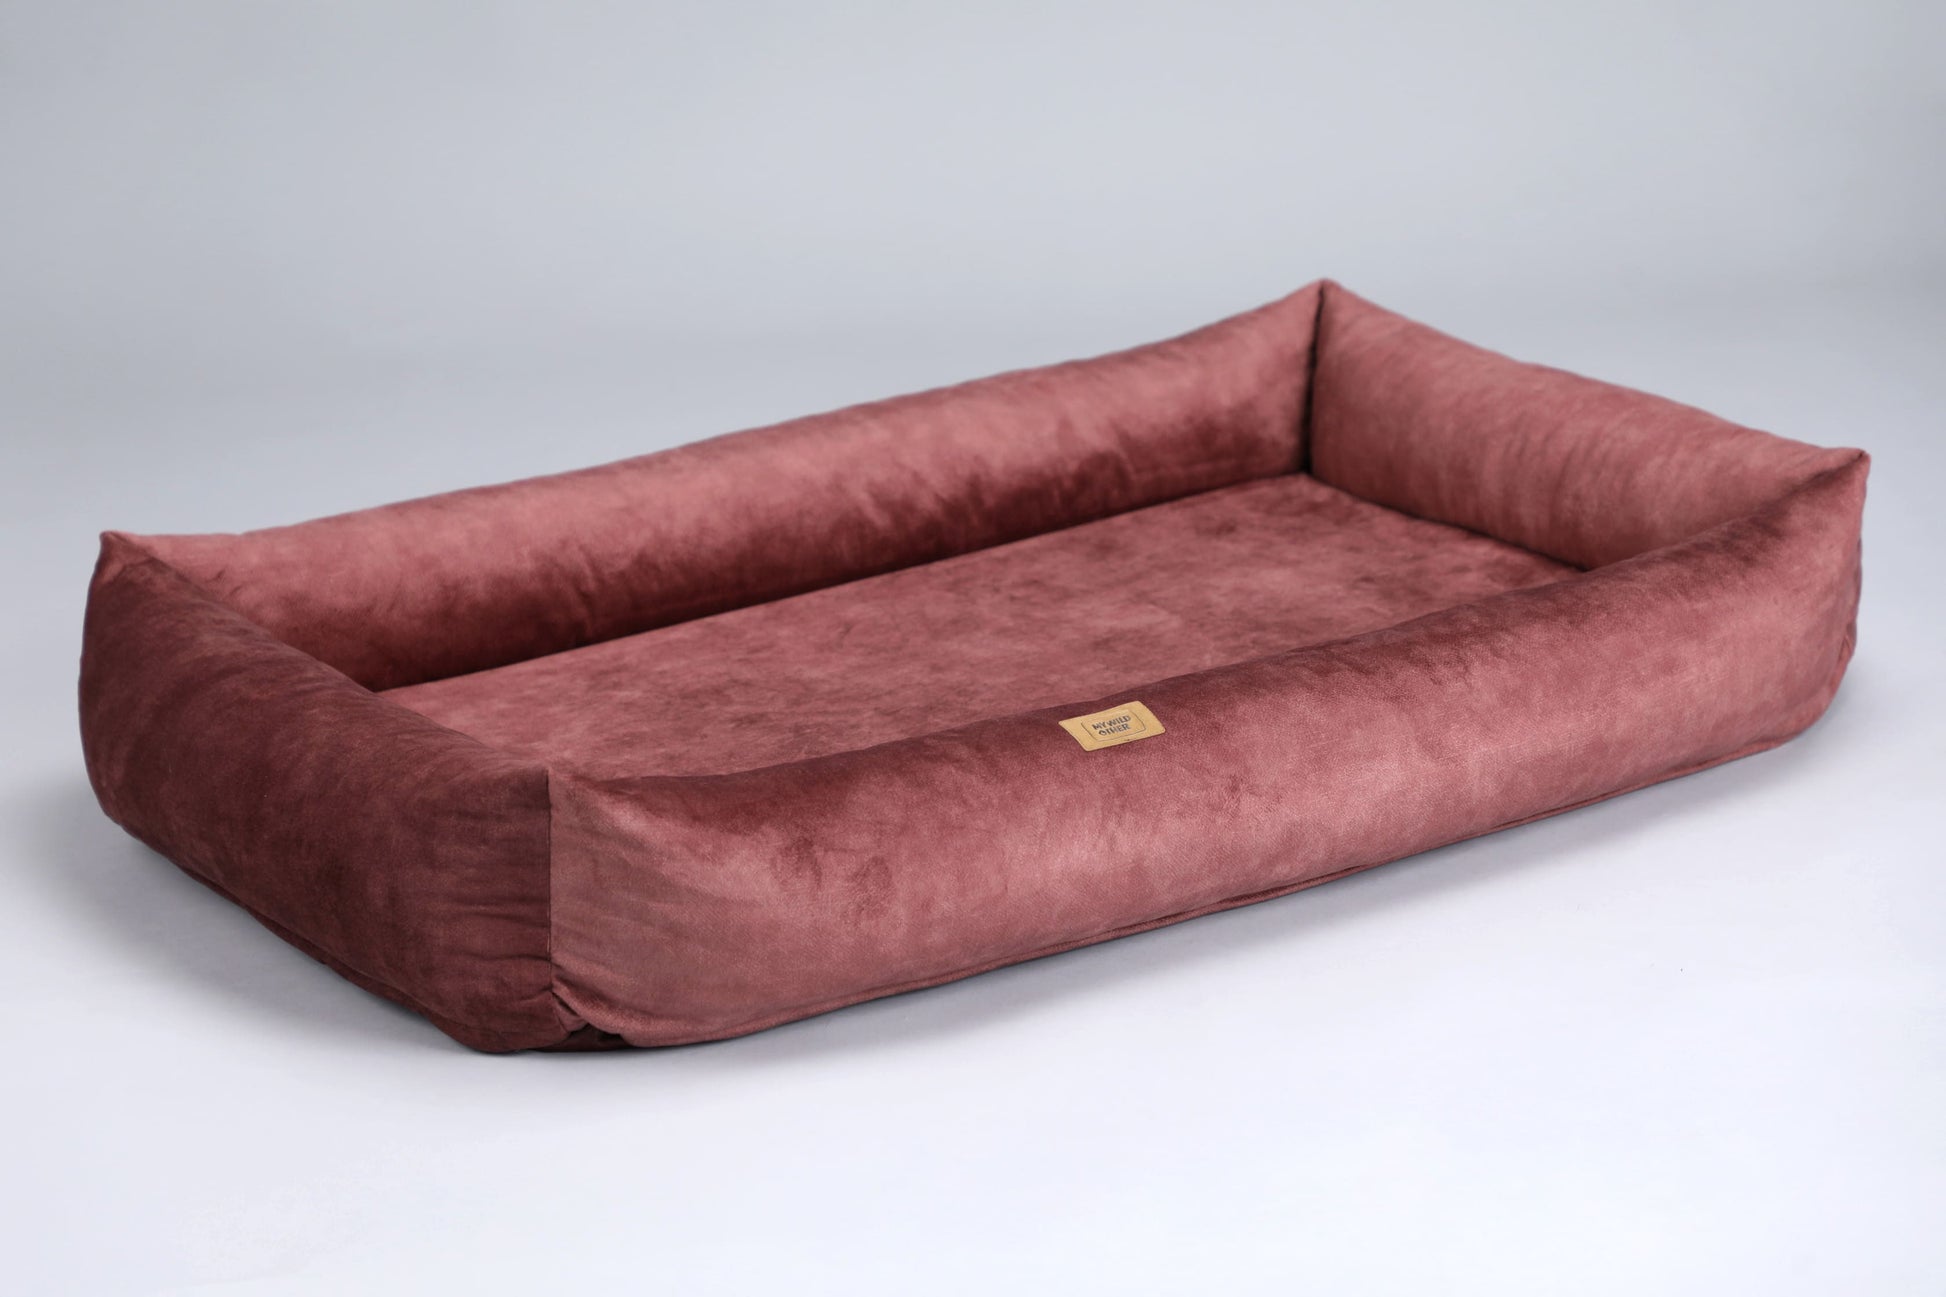 2-sided dog bed with sides. TERRACOTTA - premium dog goods handmade in Europe by My Wild Other